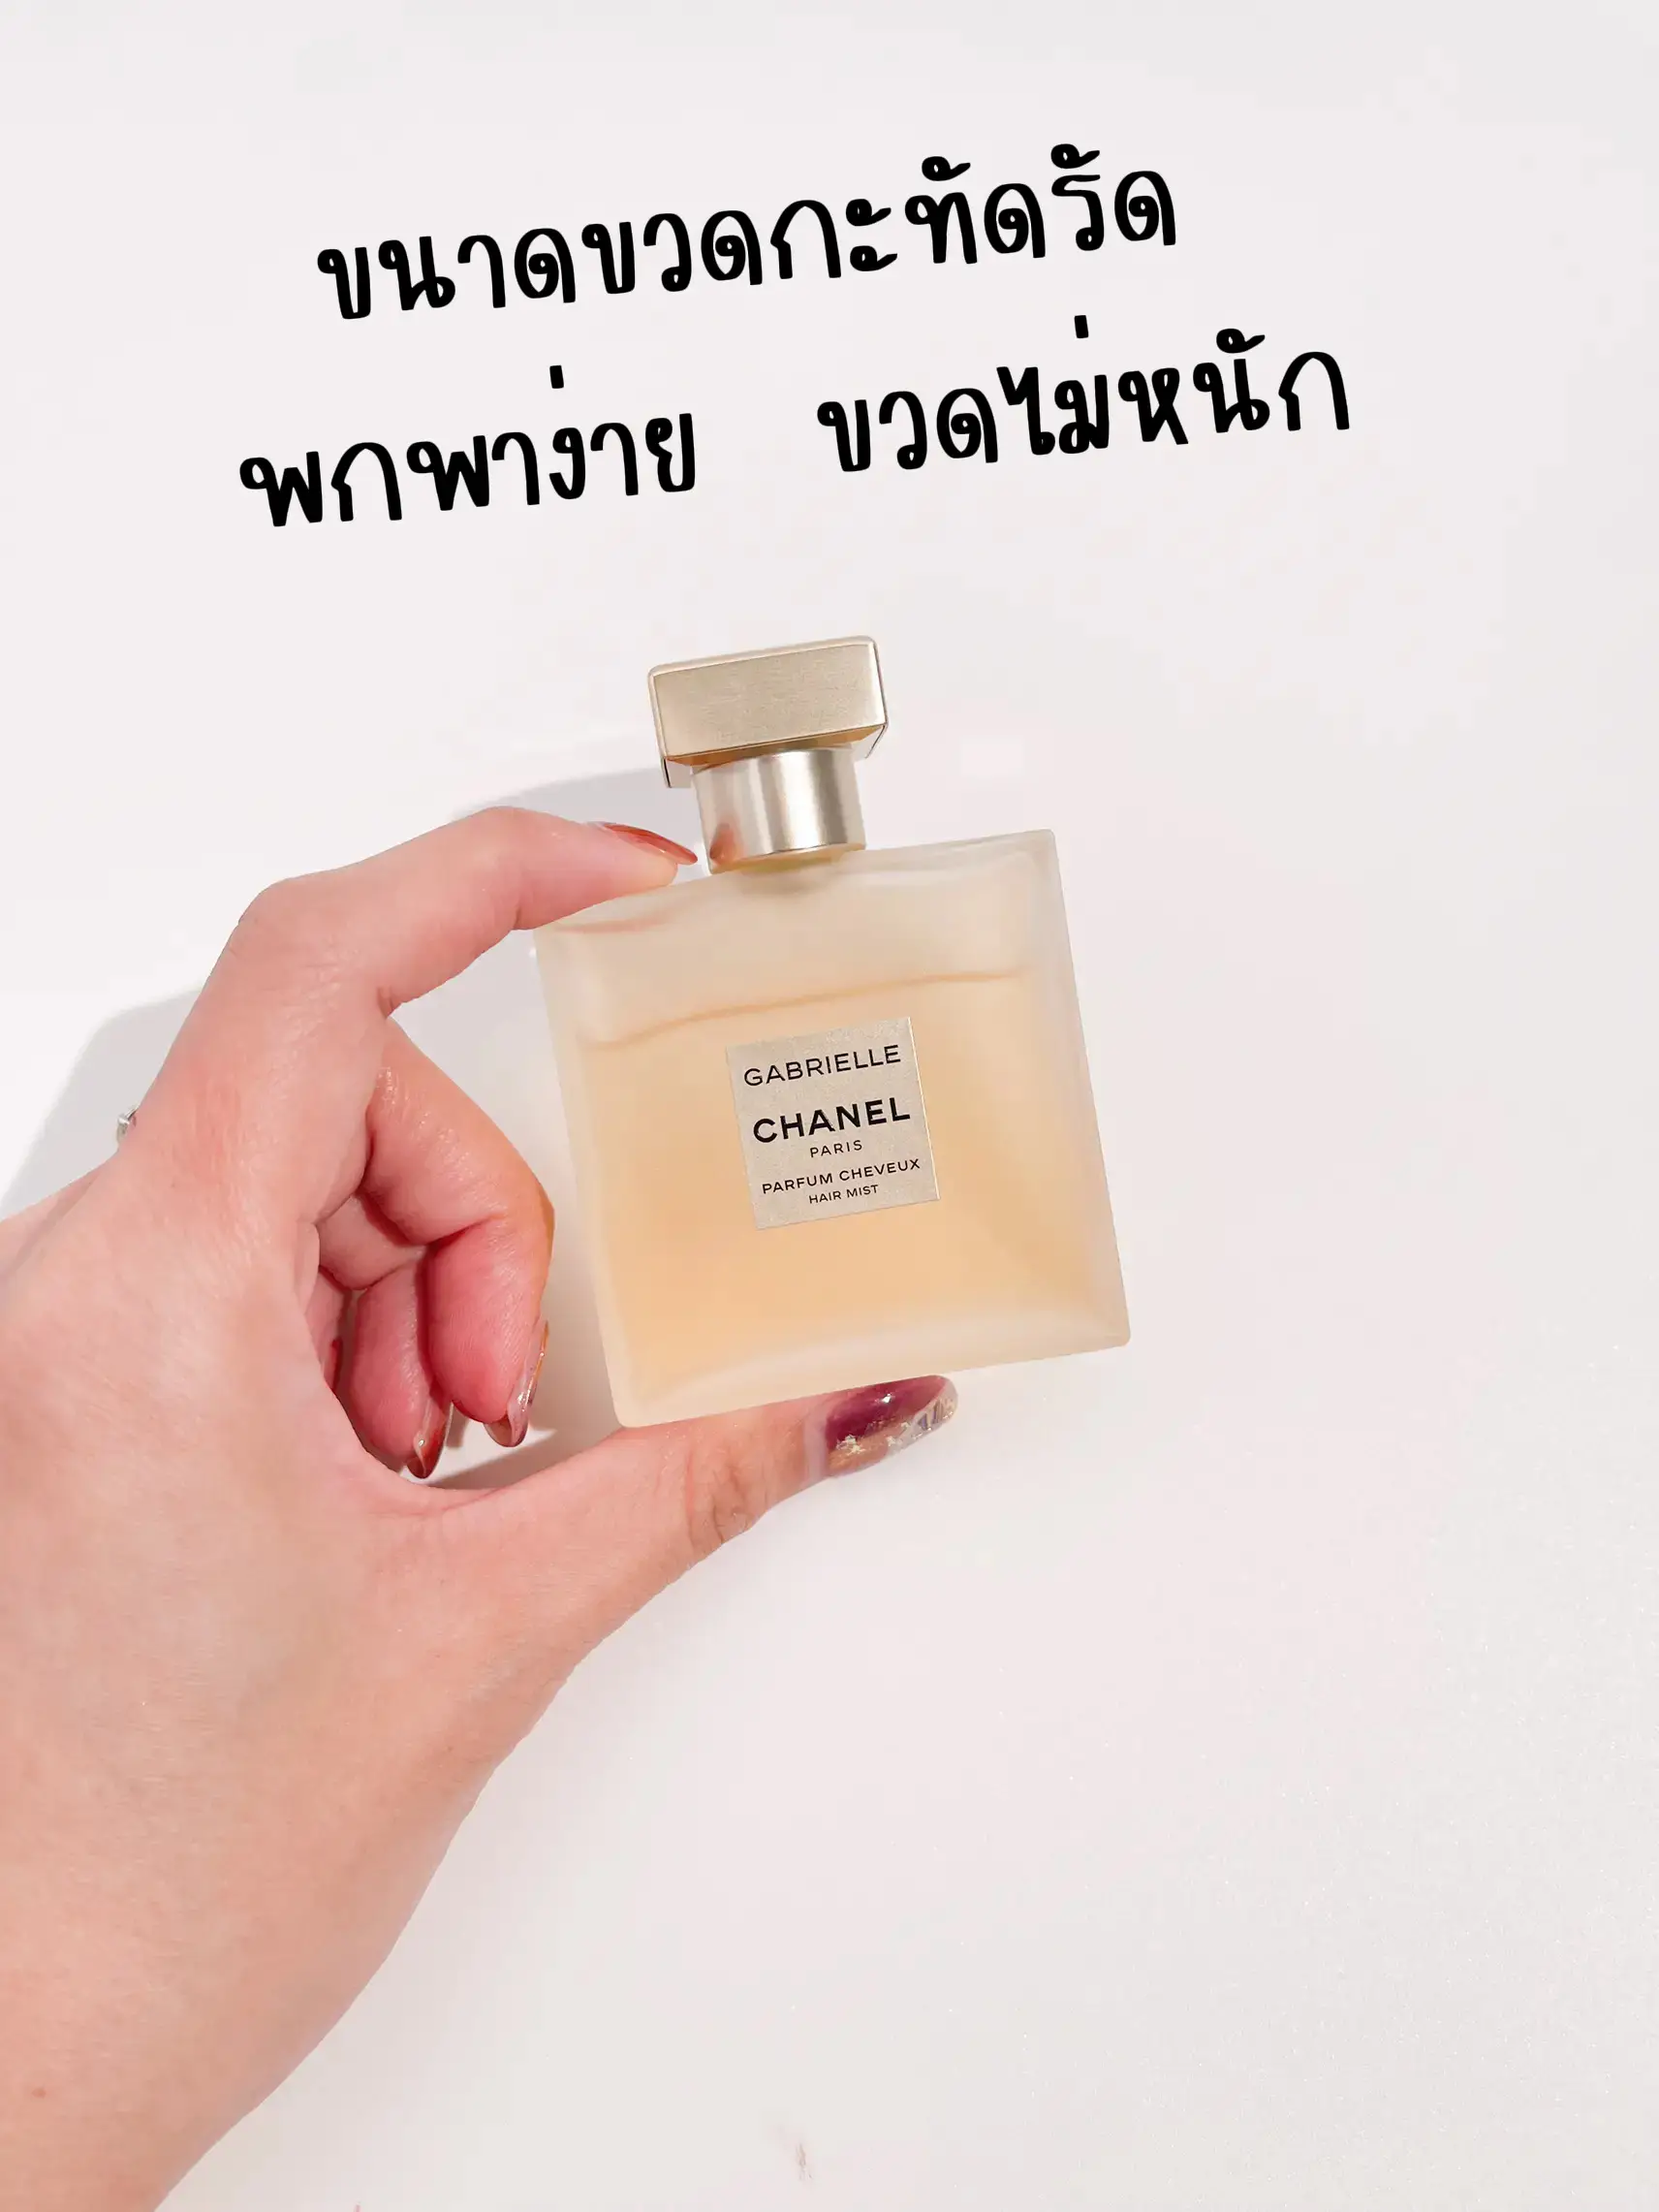 CHANEL HAIR MIST Hair Injection Perfume, Gallery posted by Tassyimm